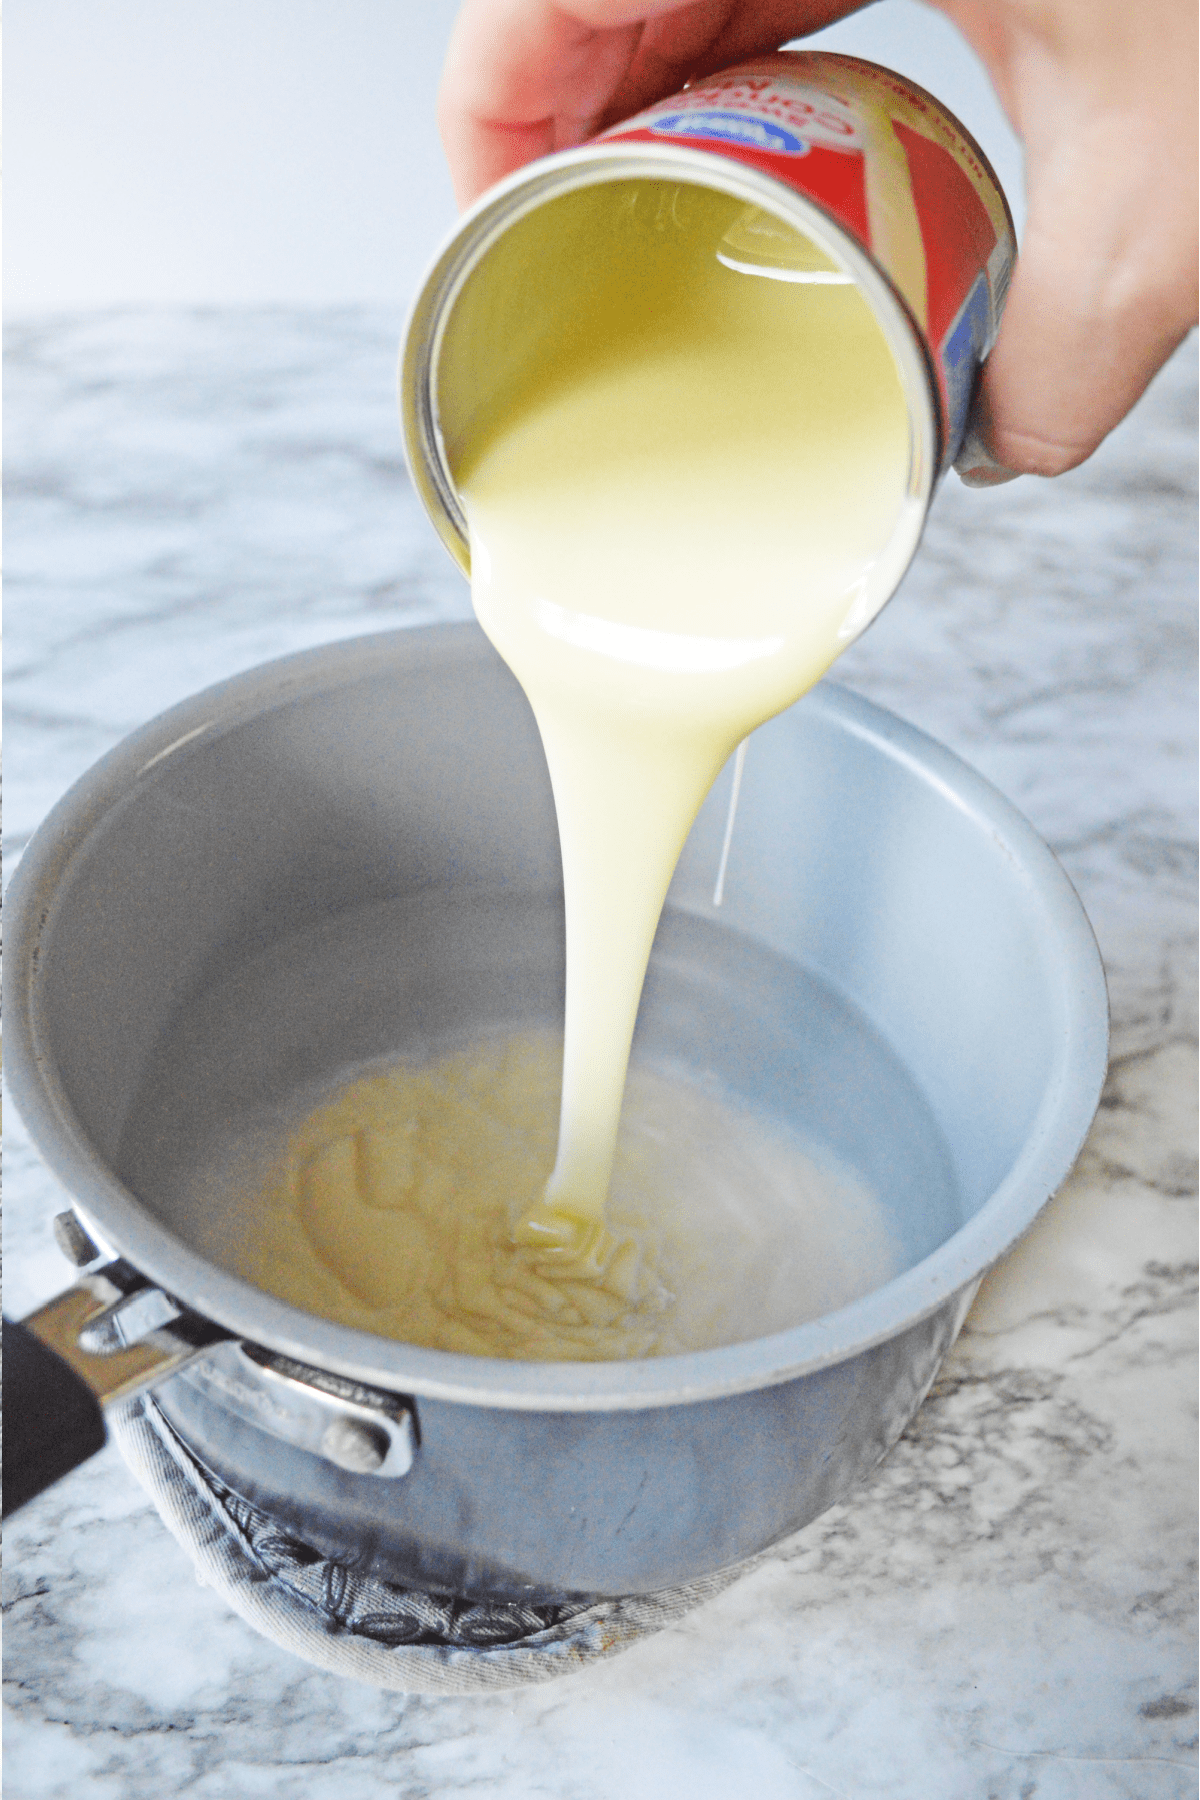 Pouring condensed milk into a saucepan of water